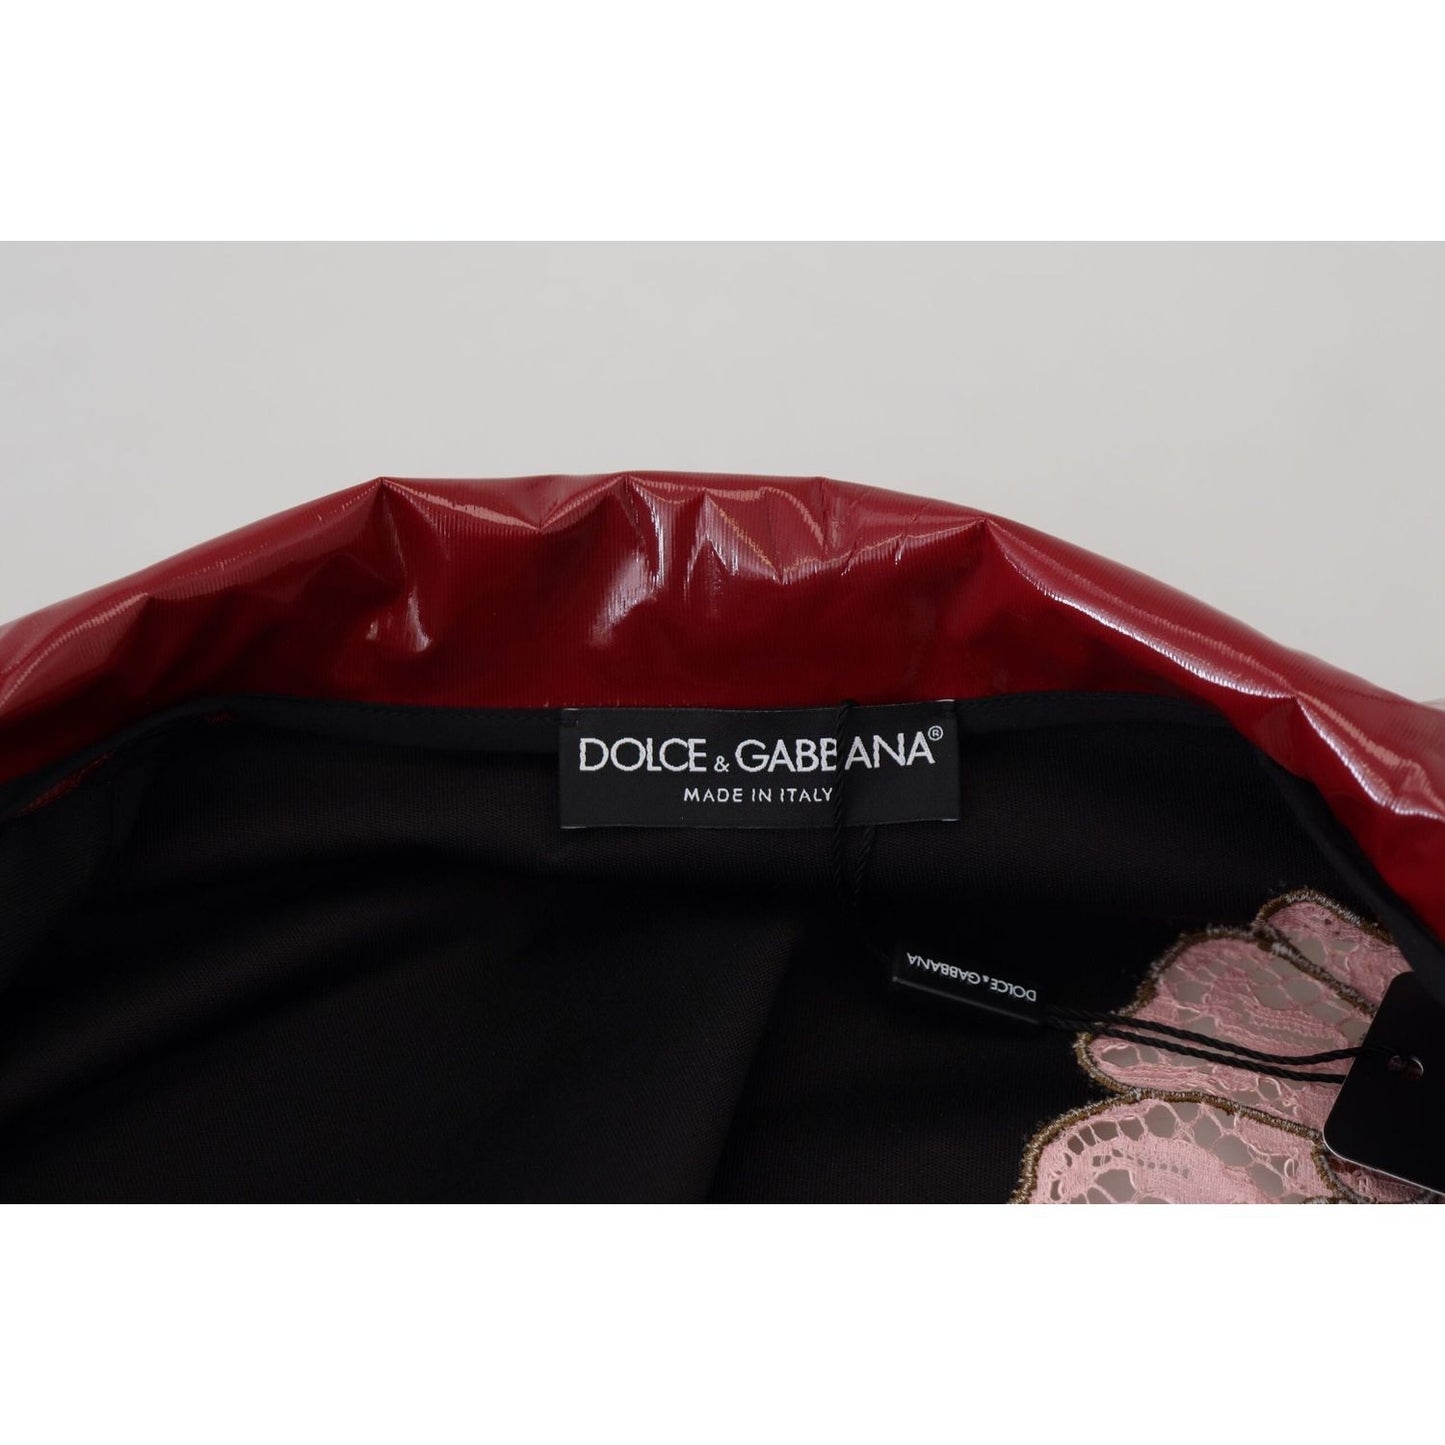 Dolce & Gabbana Maroon Floral Luxe Jacket maroon-floral-full-zip-polyester-women-jacket